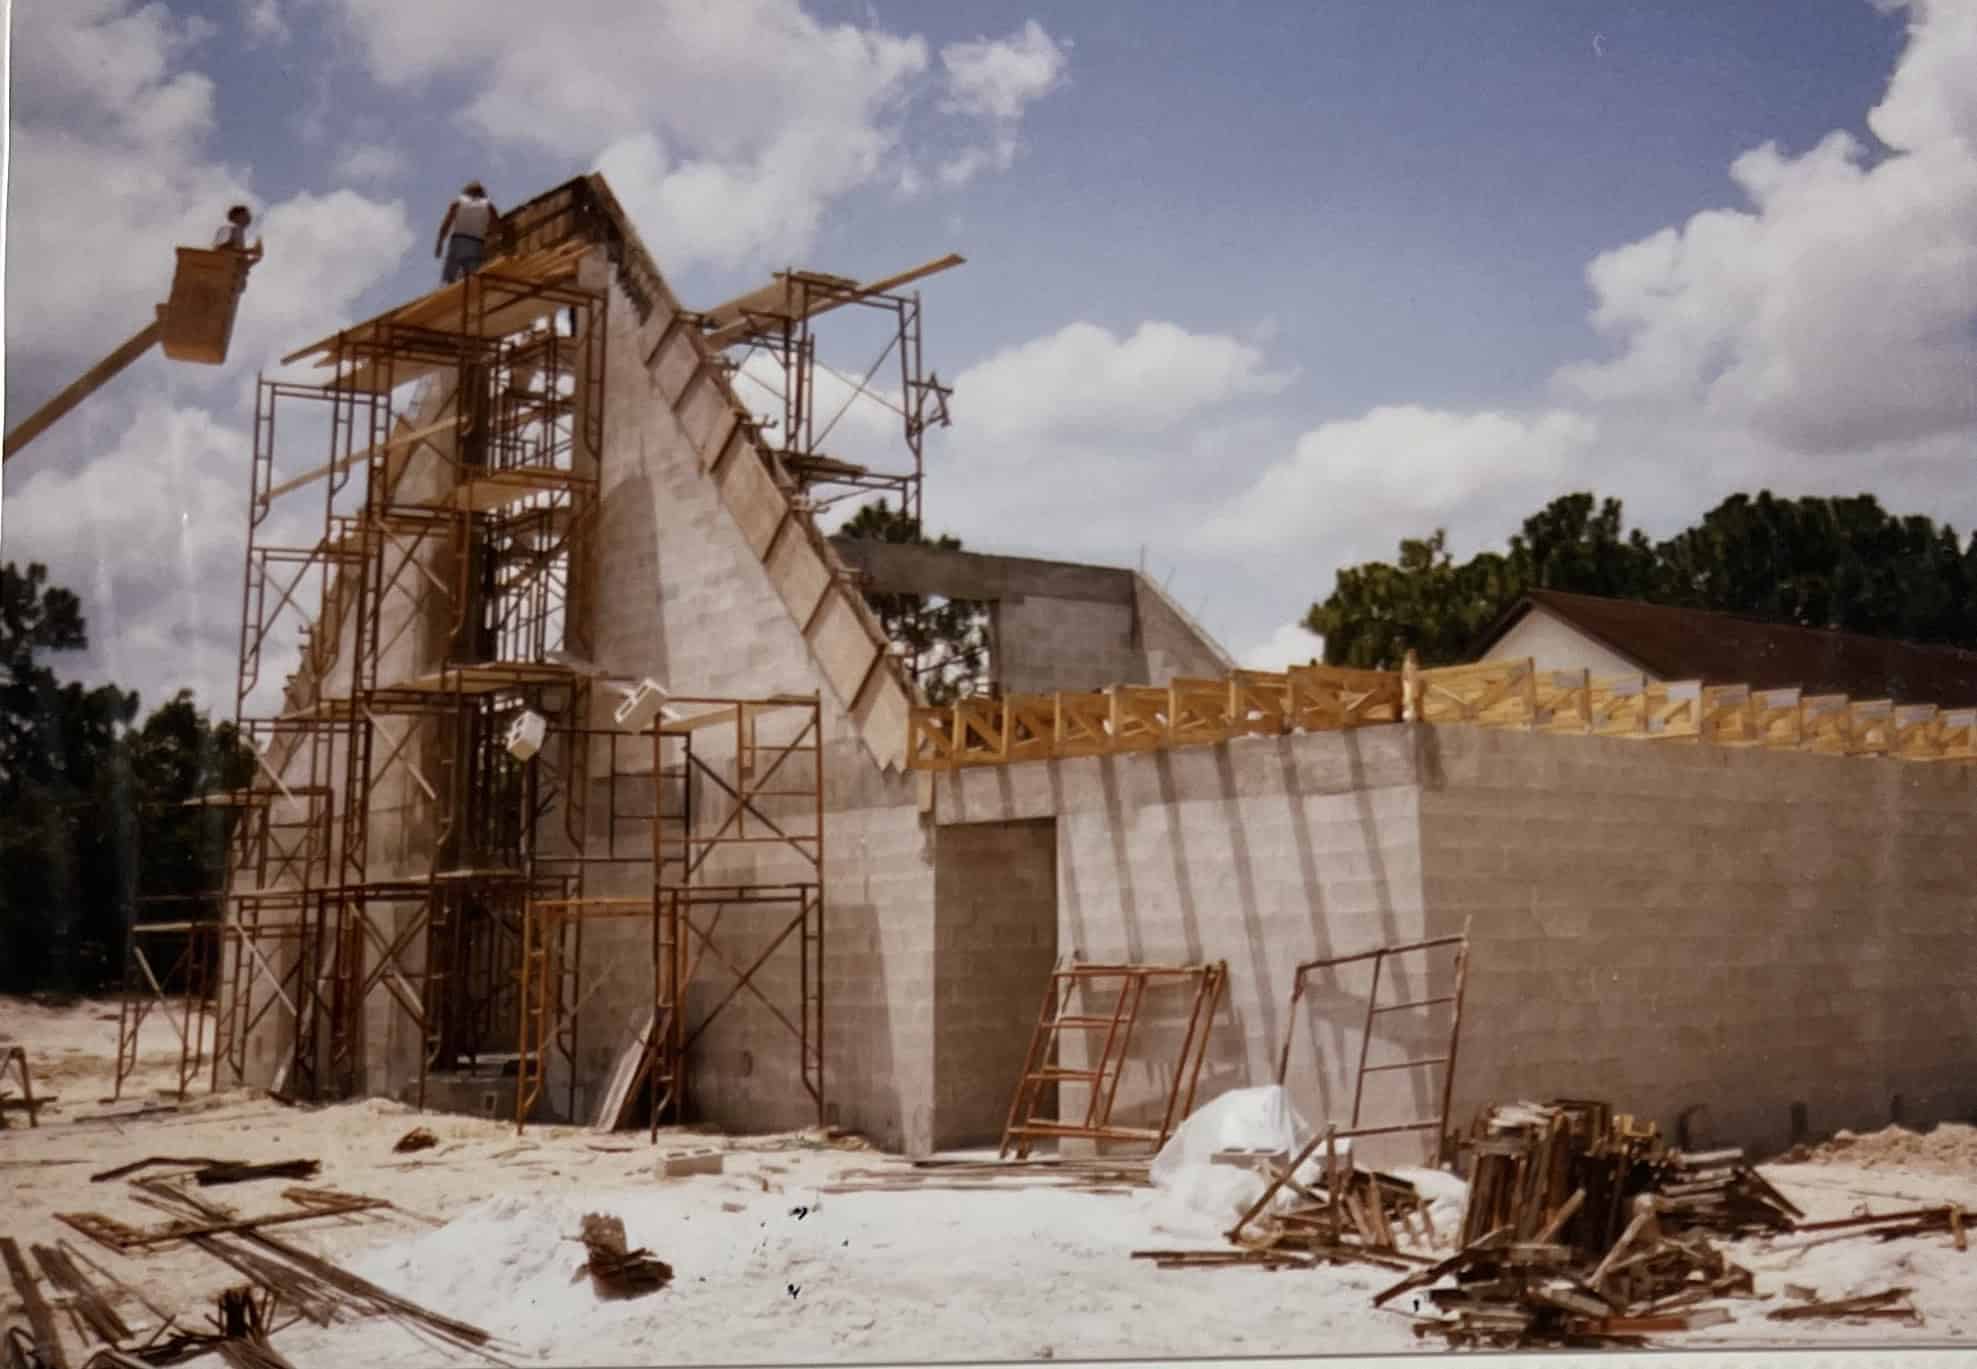 The building of the new sanctuary. [Photo courtesy of TBD]